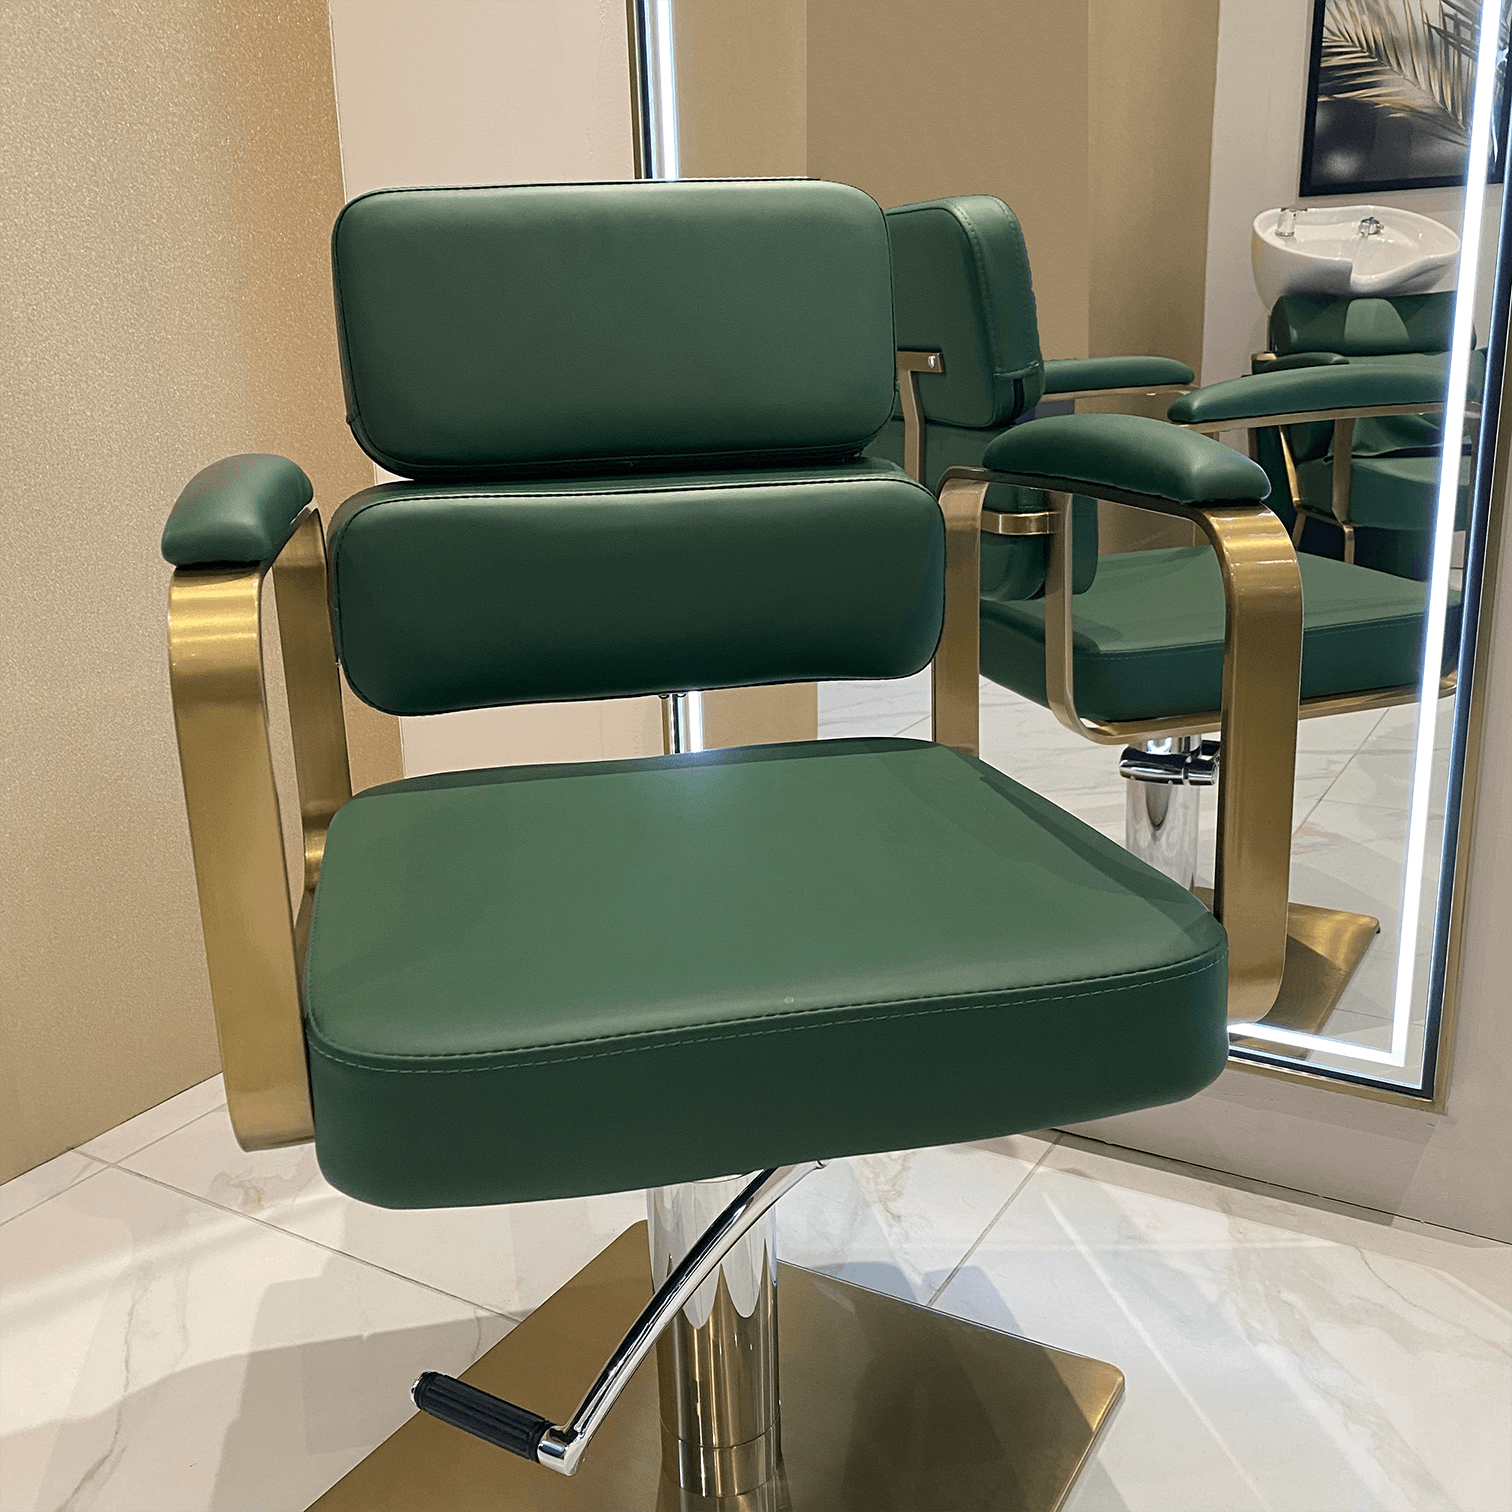 The Rosie Salon Styling Chair - Green & Gold by SEC